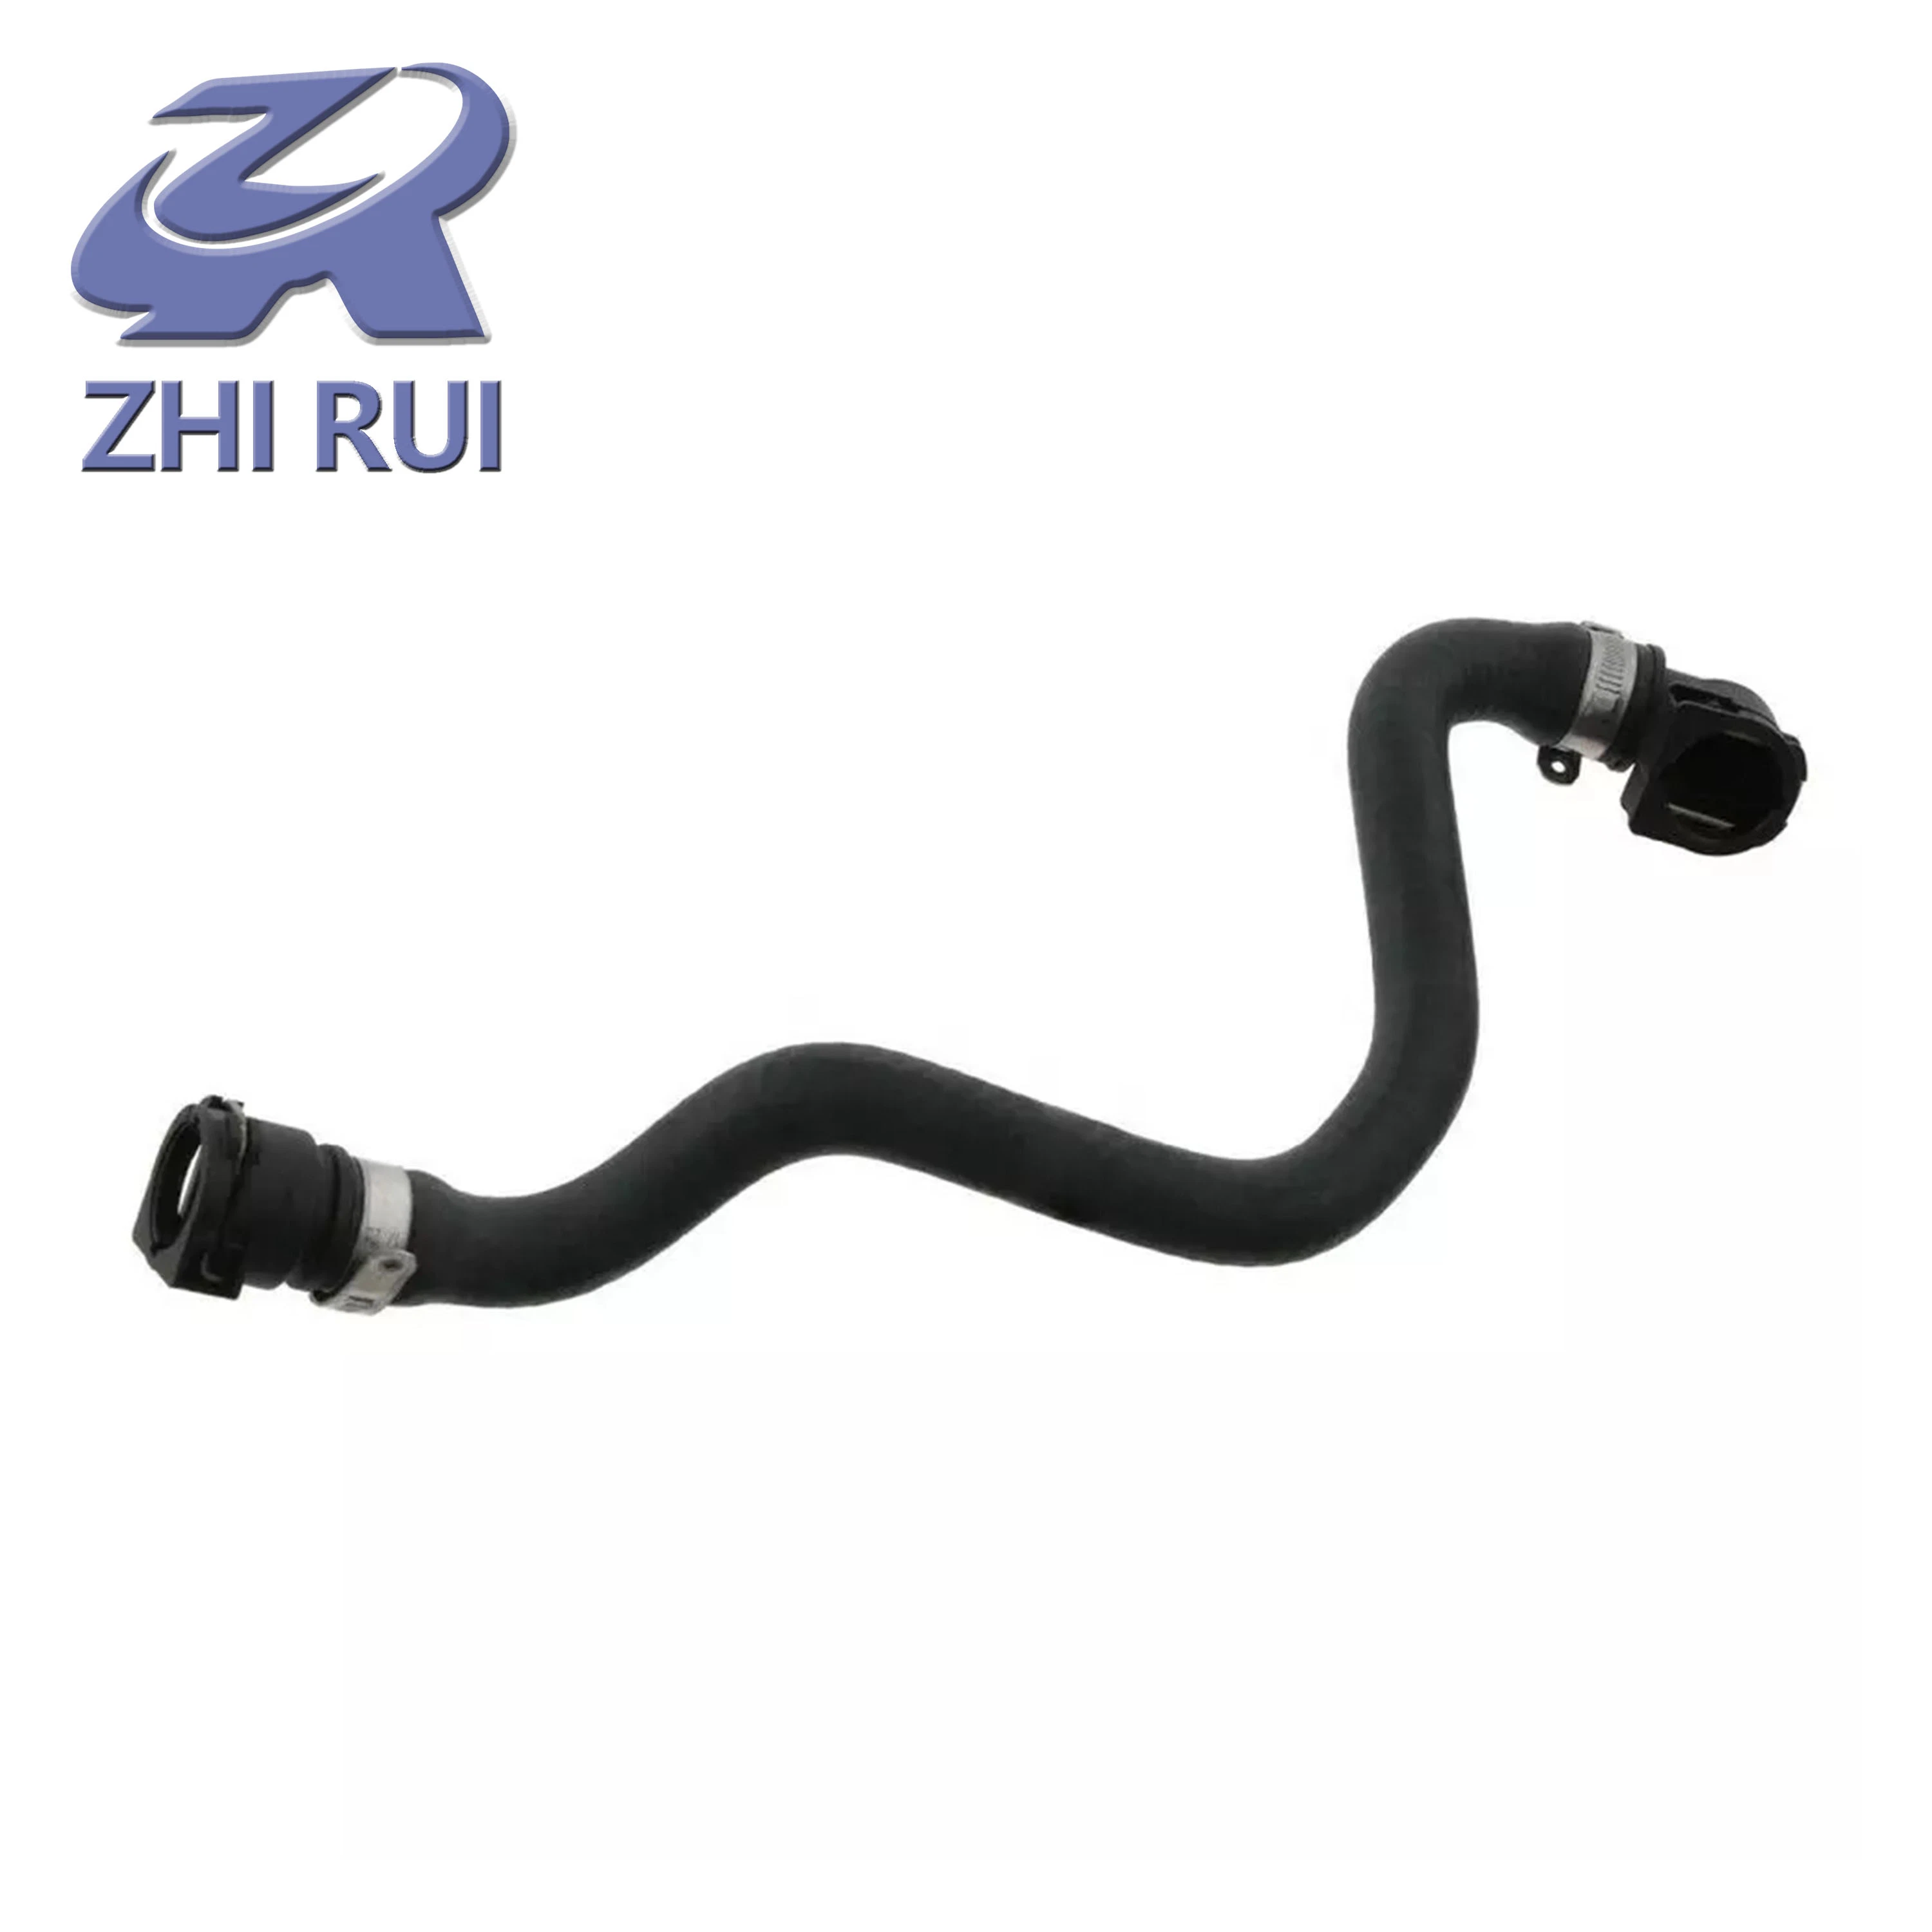 1153 7500 752 Auto Engine Parts Turbocharger Air Intake Duct Hose Air Intake Pipe for BMW 4.6is OEM 11537500752